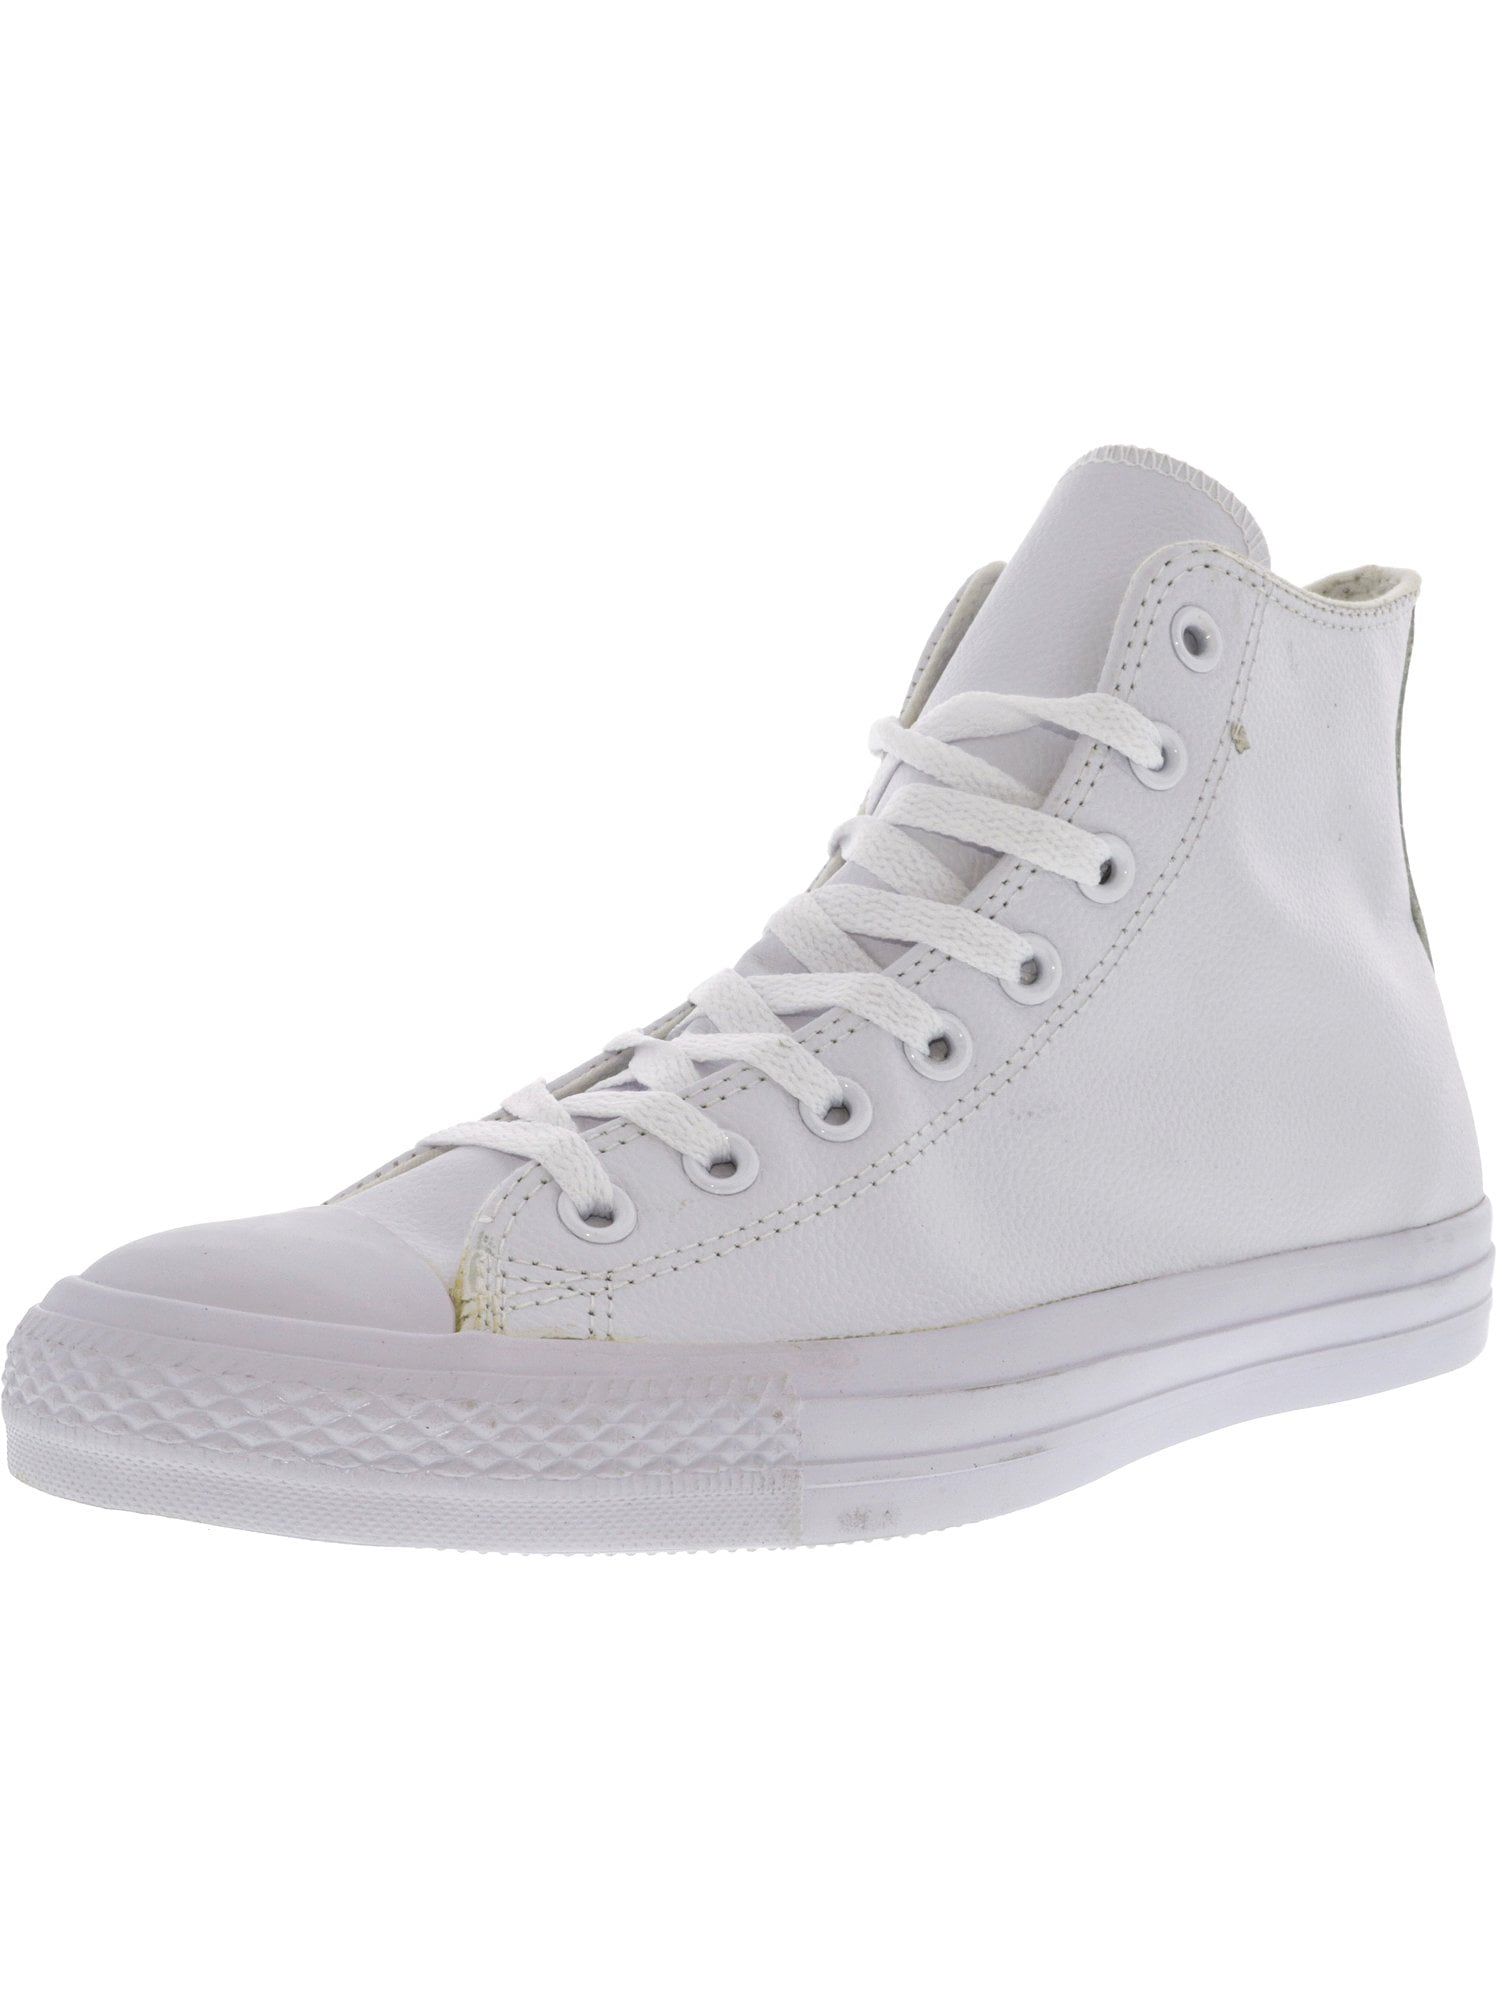 converse all star hi leather suede sneaker